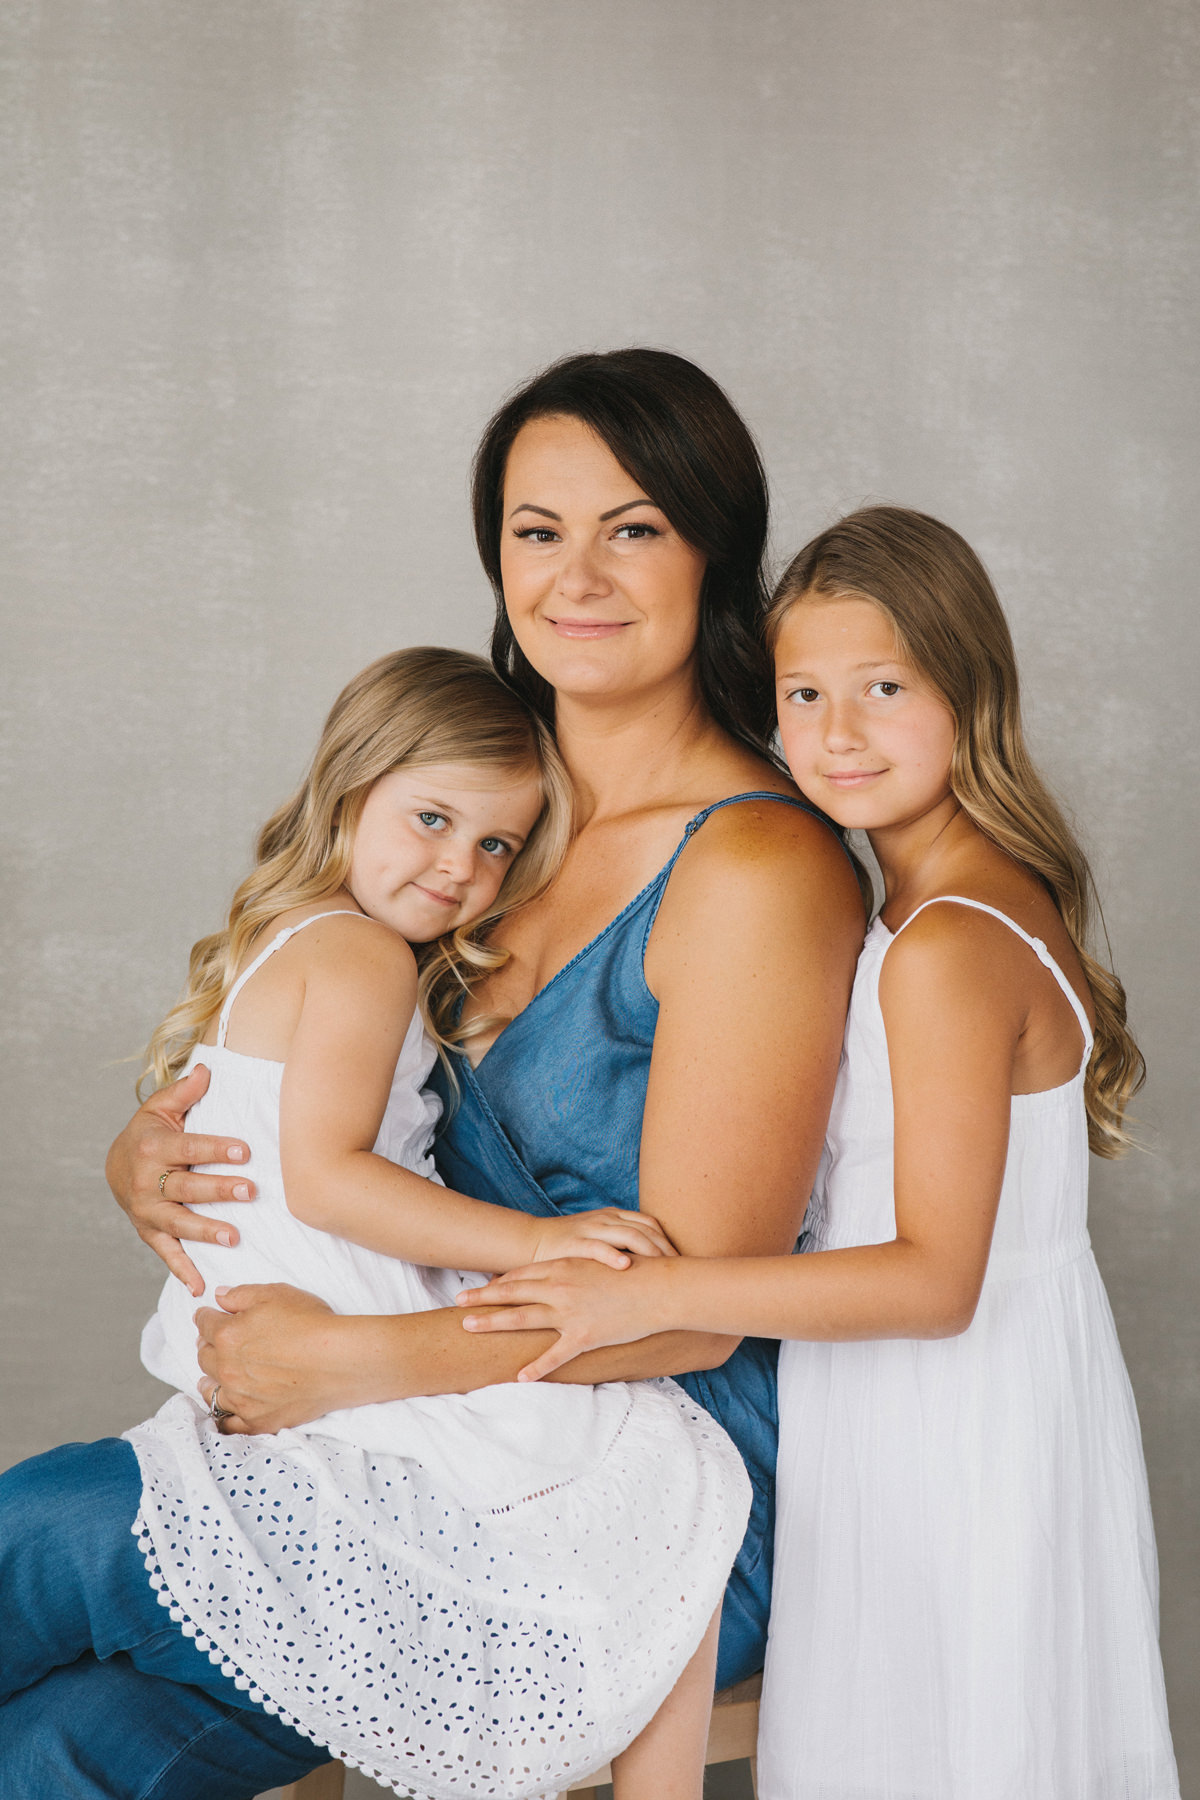 A portrait of a mother with her two young daughters. This was created in a photography studio.